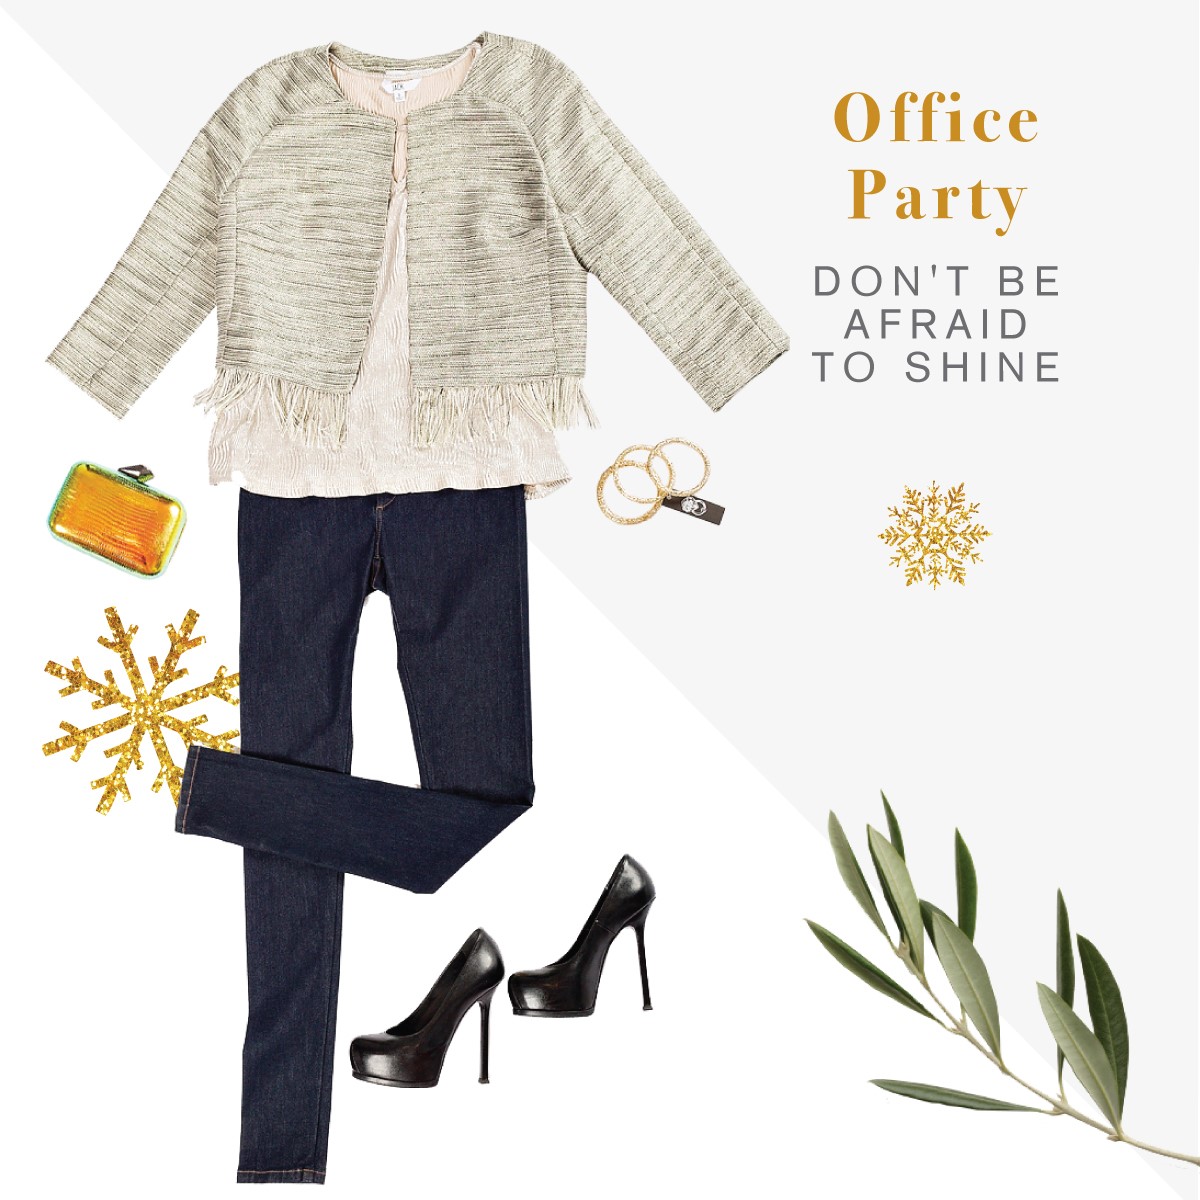 What to wear to a holiday office party